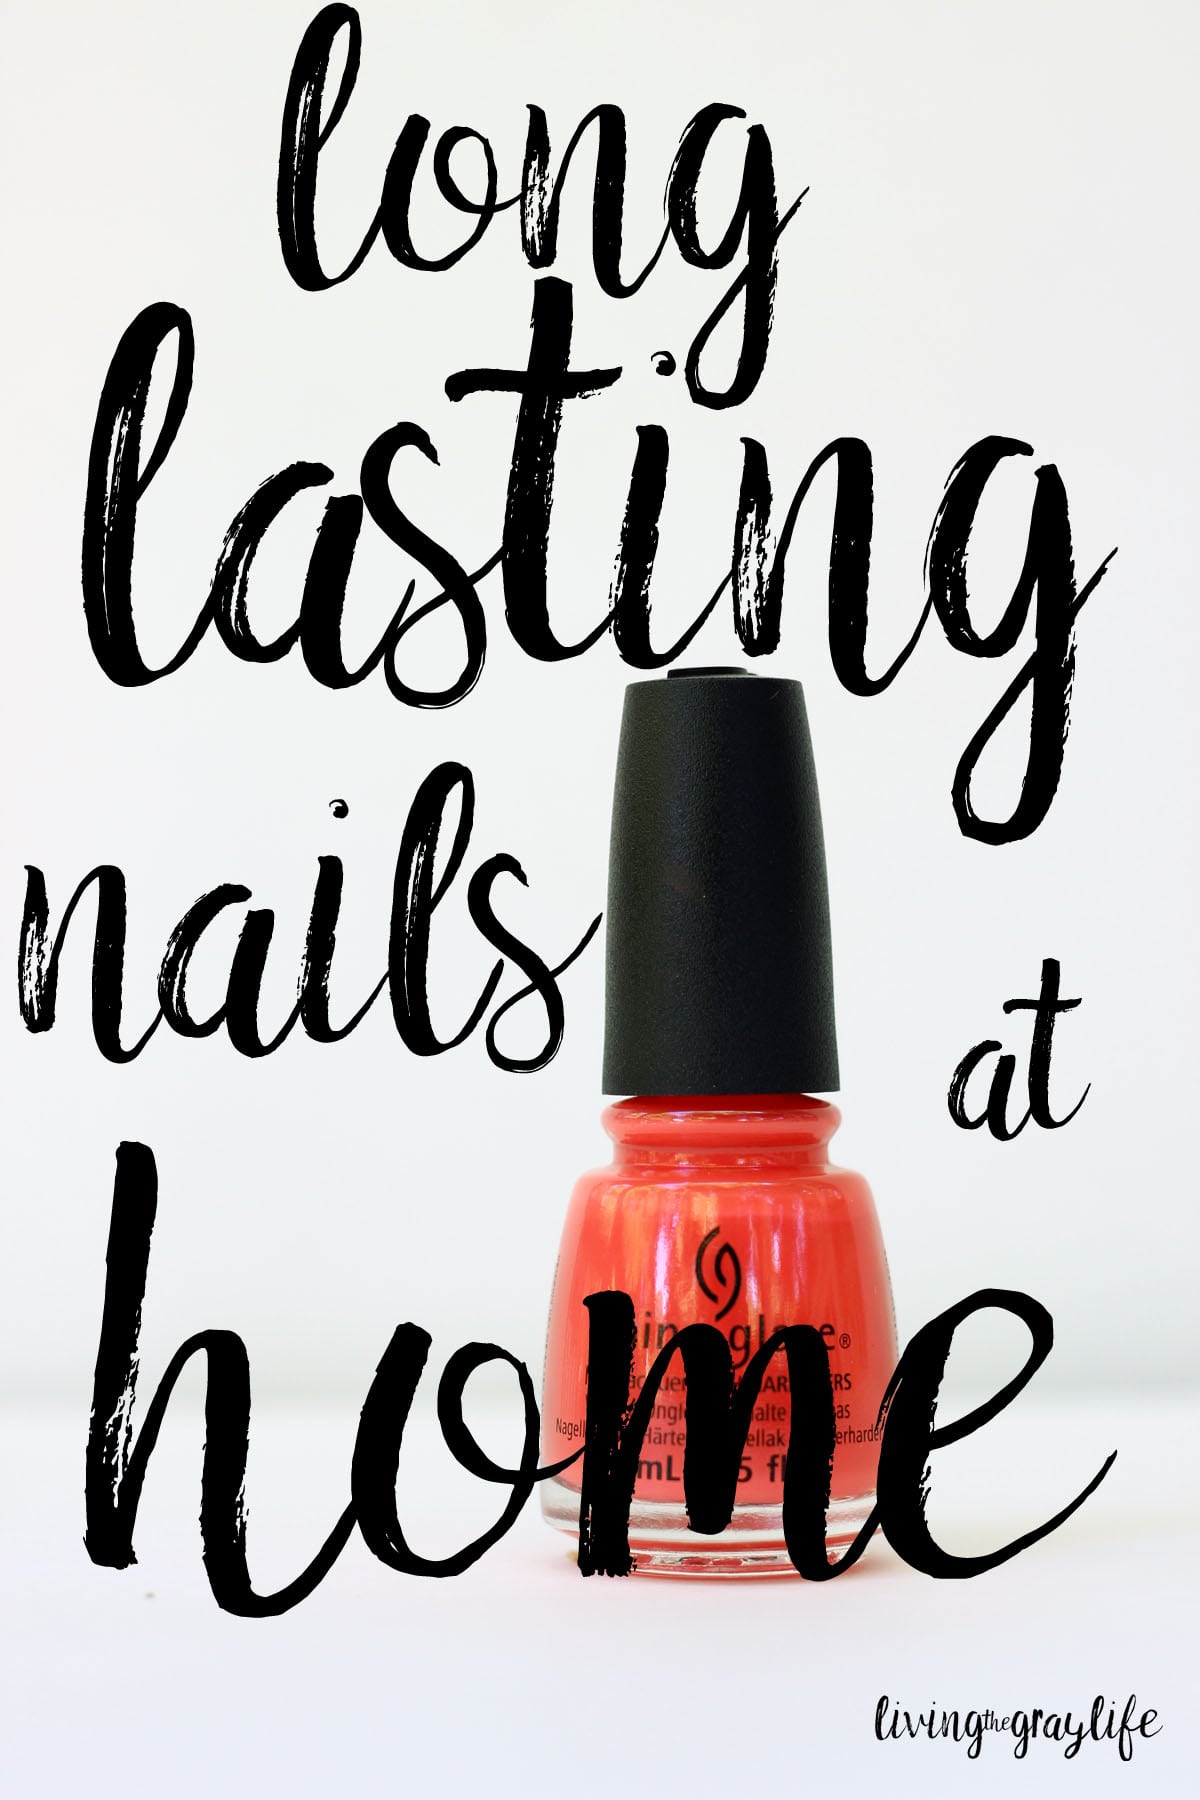 Want long lasting nails without the salon price? Find out how one product will make long lasting nails at home a piece of cake!